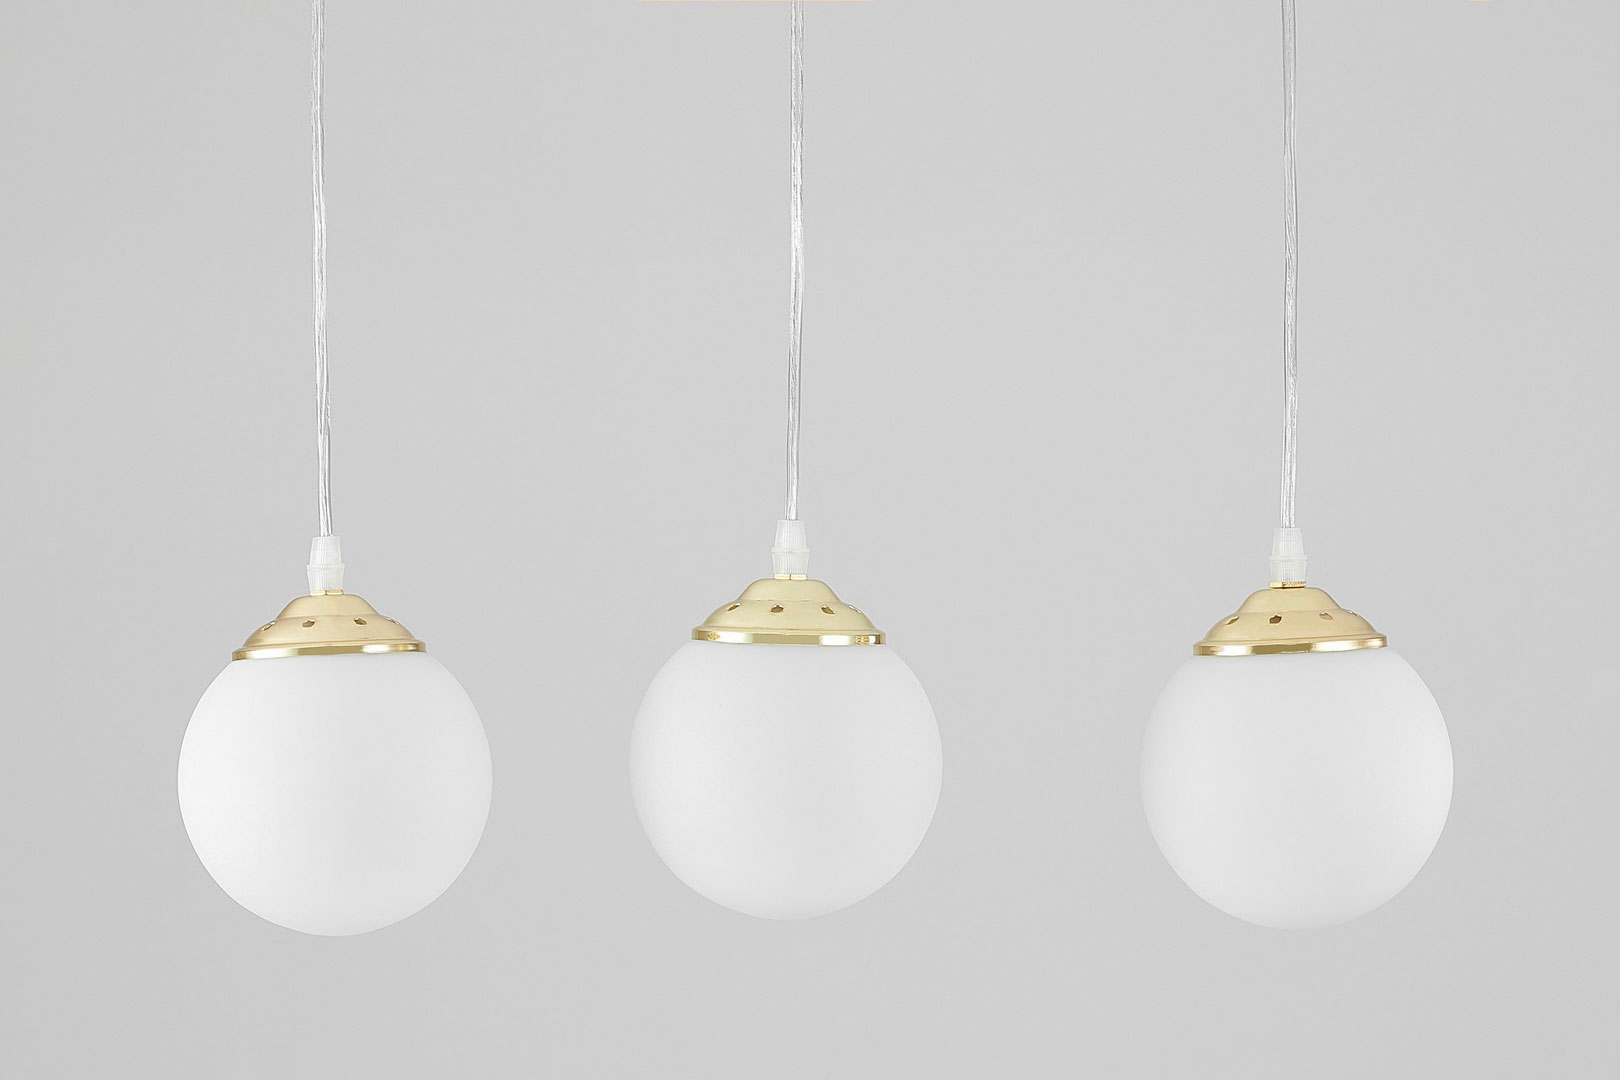 Triple pendant lamp over dining table or kitchen island, white spheres, classic gold - FINO - Lampit image 4